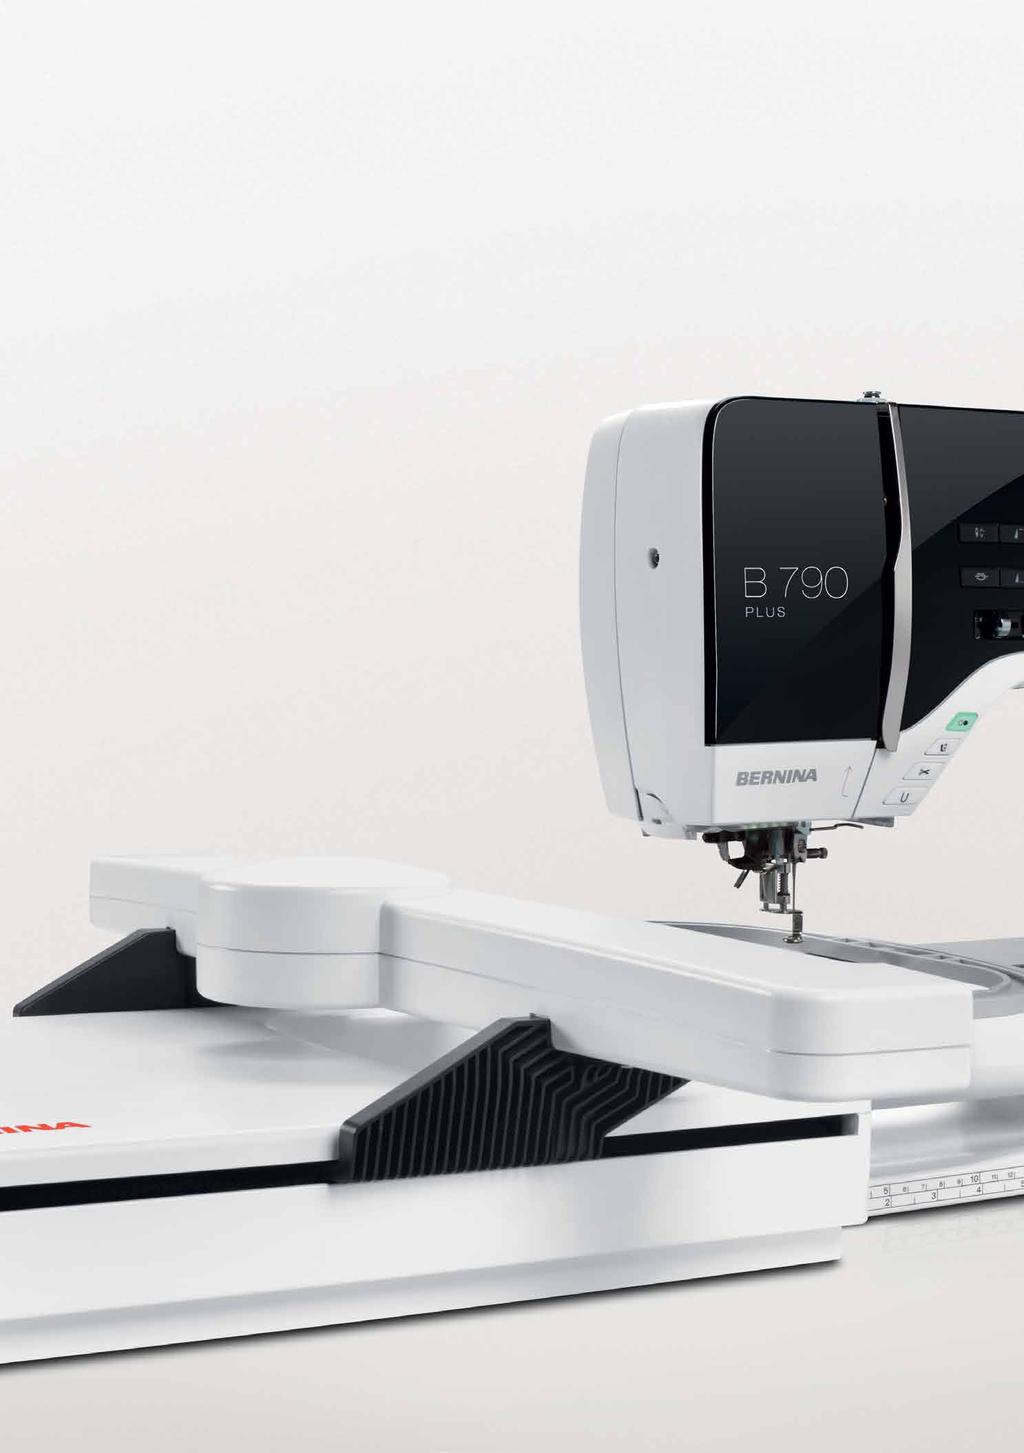 Beautiful Embroidery is Simple Both the B 790 PLUS and B 770 QE can embroider, though the B 790 PLUS offers even more features and options for embroidery lovers.